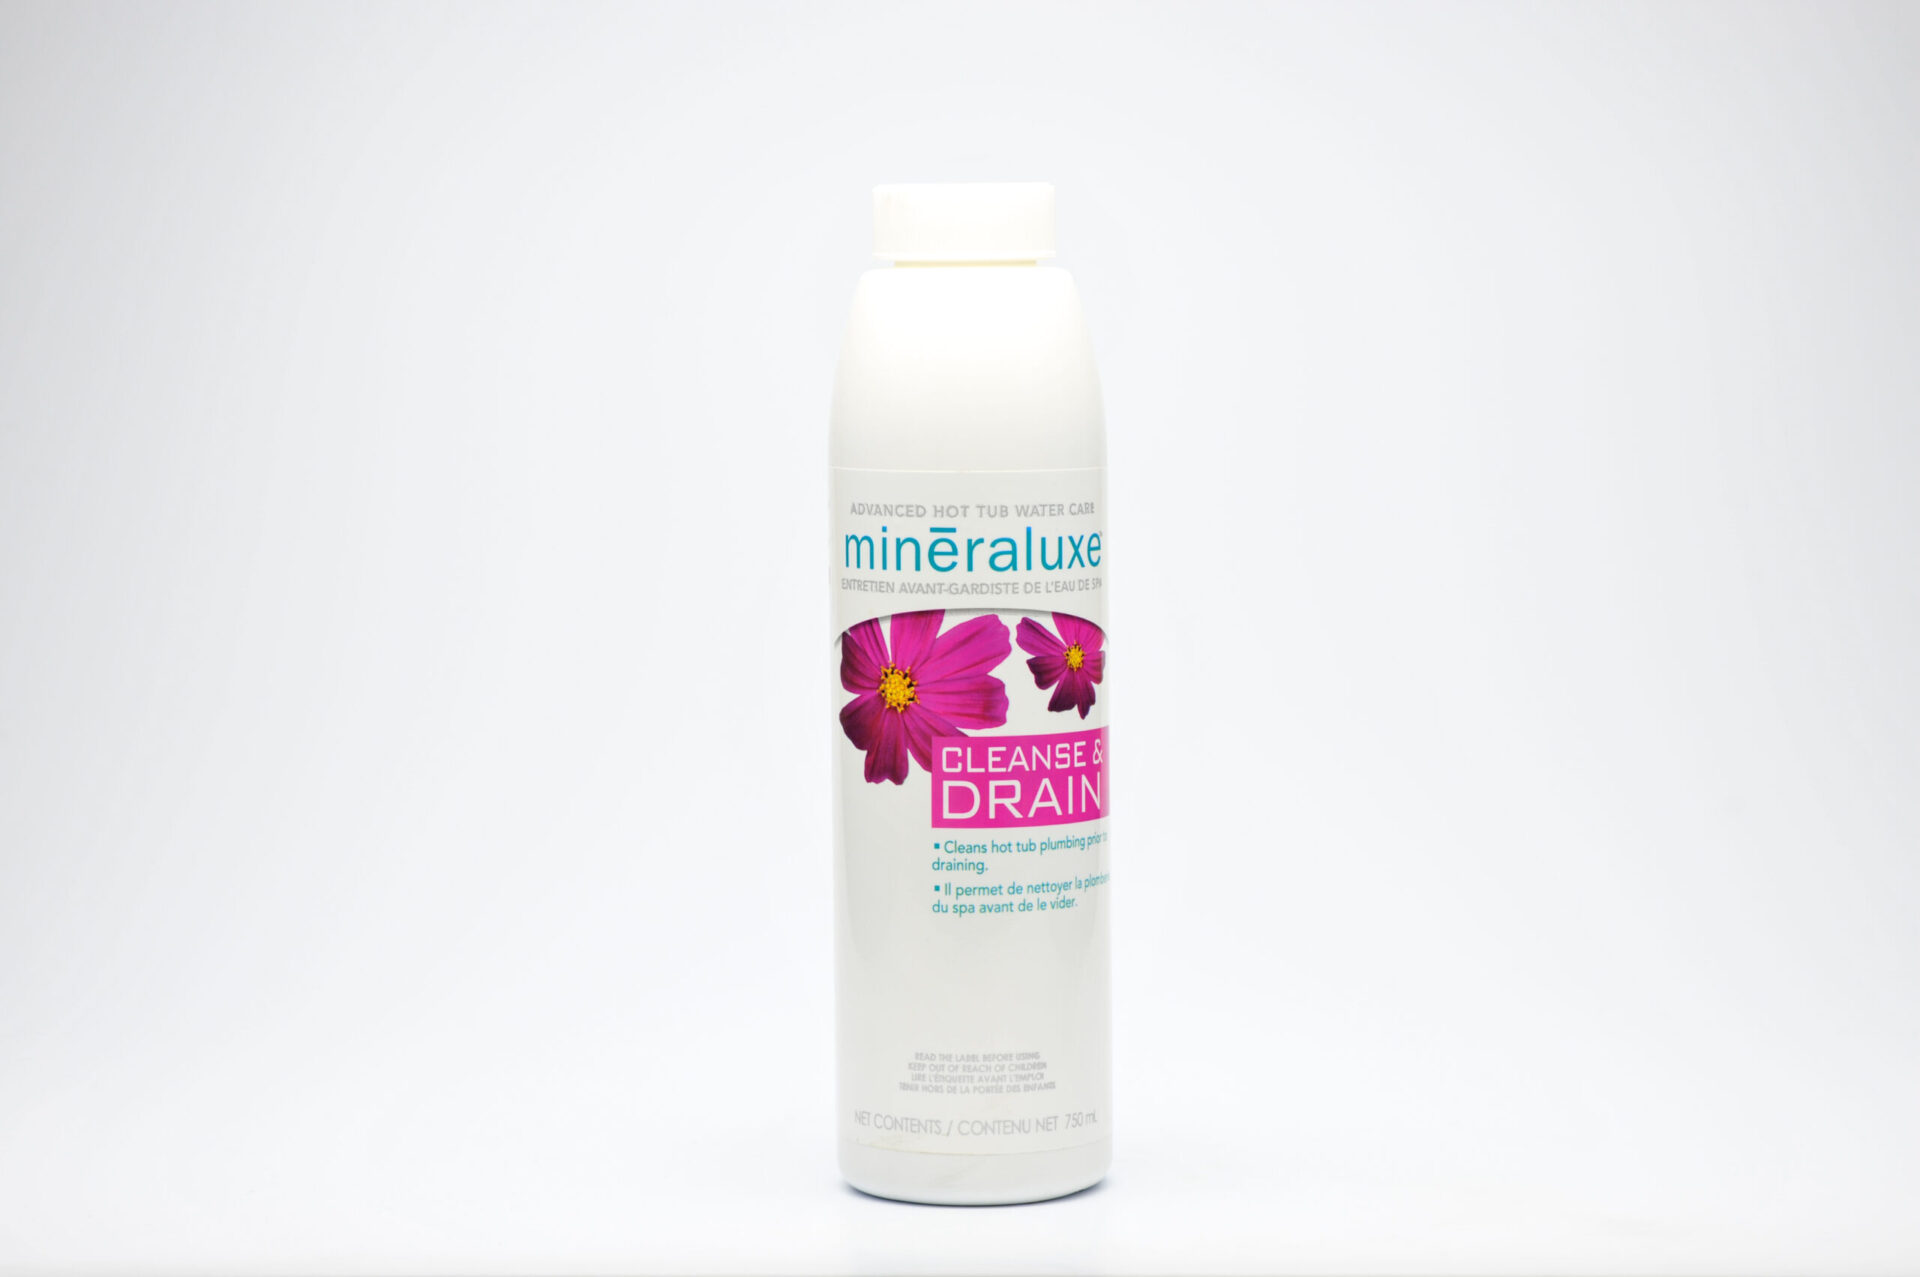 Cleanse Drain 750ml scaled - MINERALUXE CLEANSE and DRAIN - 750ml